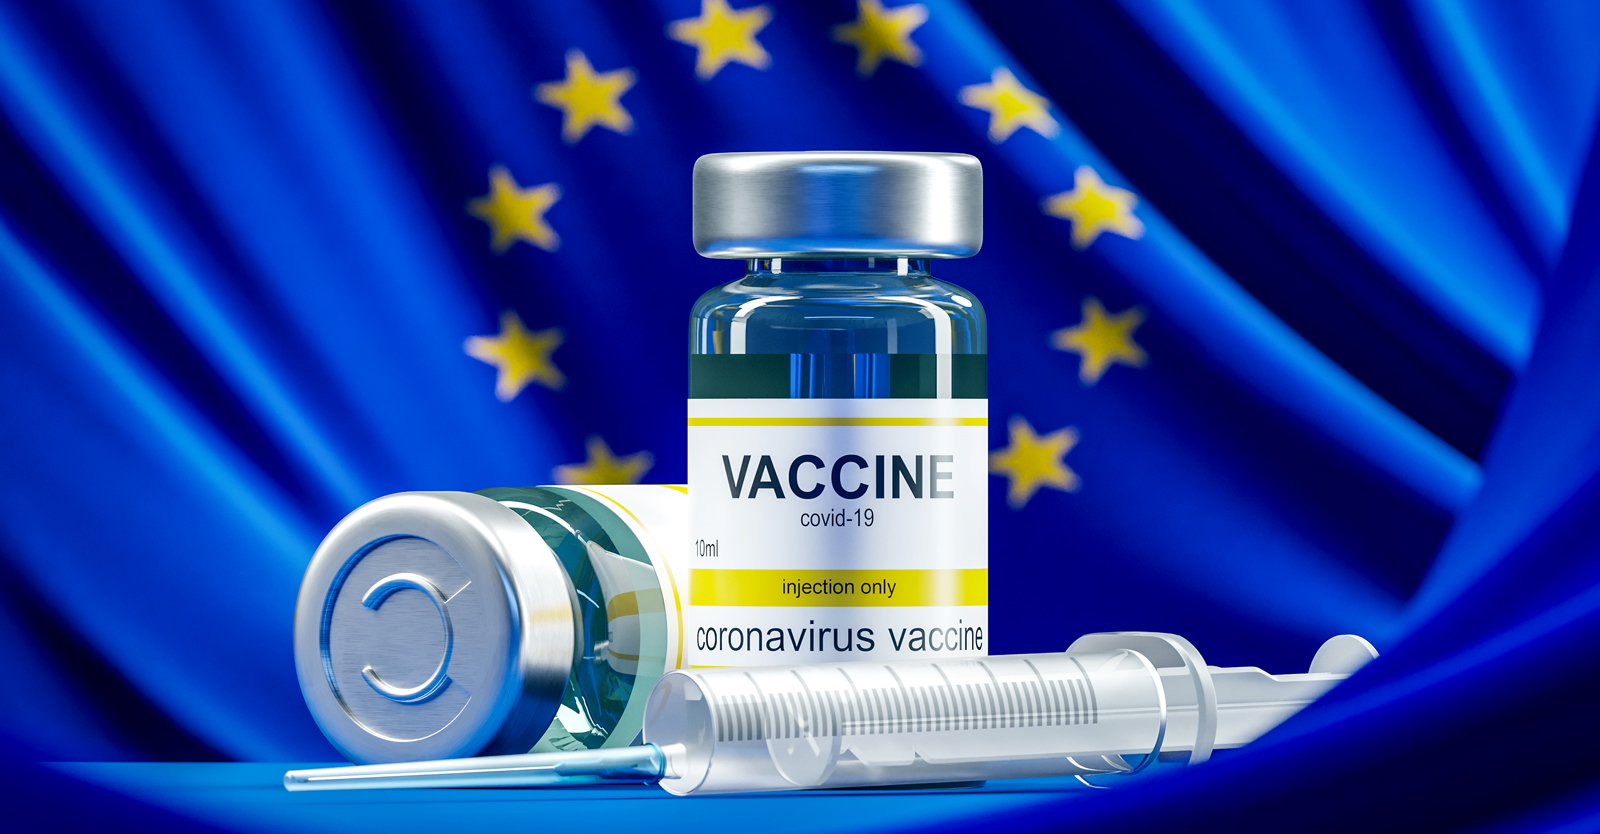 EU Reports 20,595 Vaccine Related Deaths